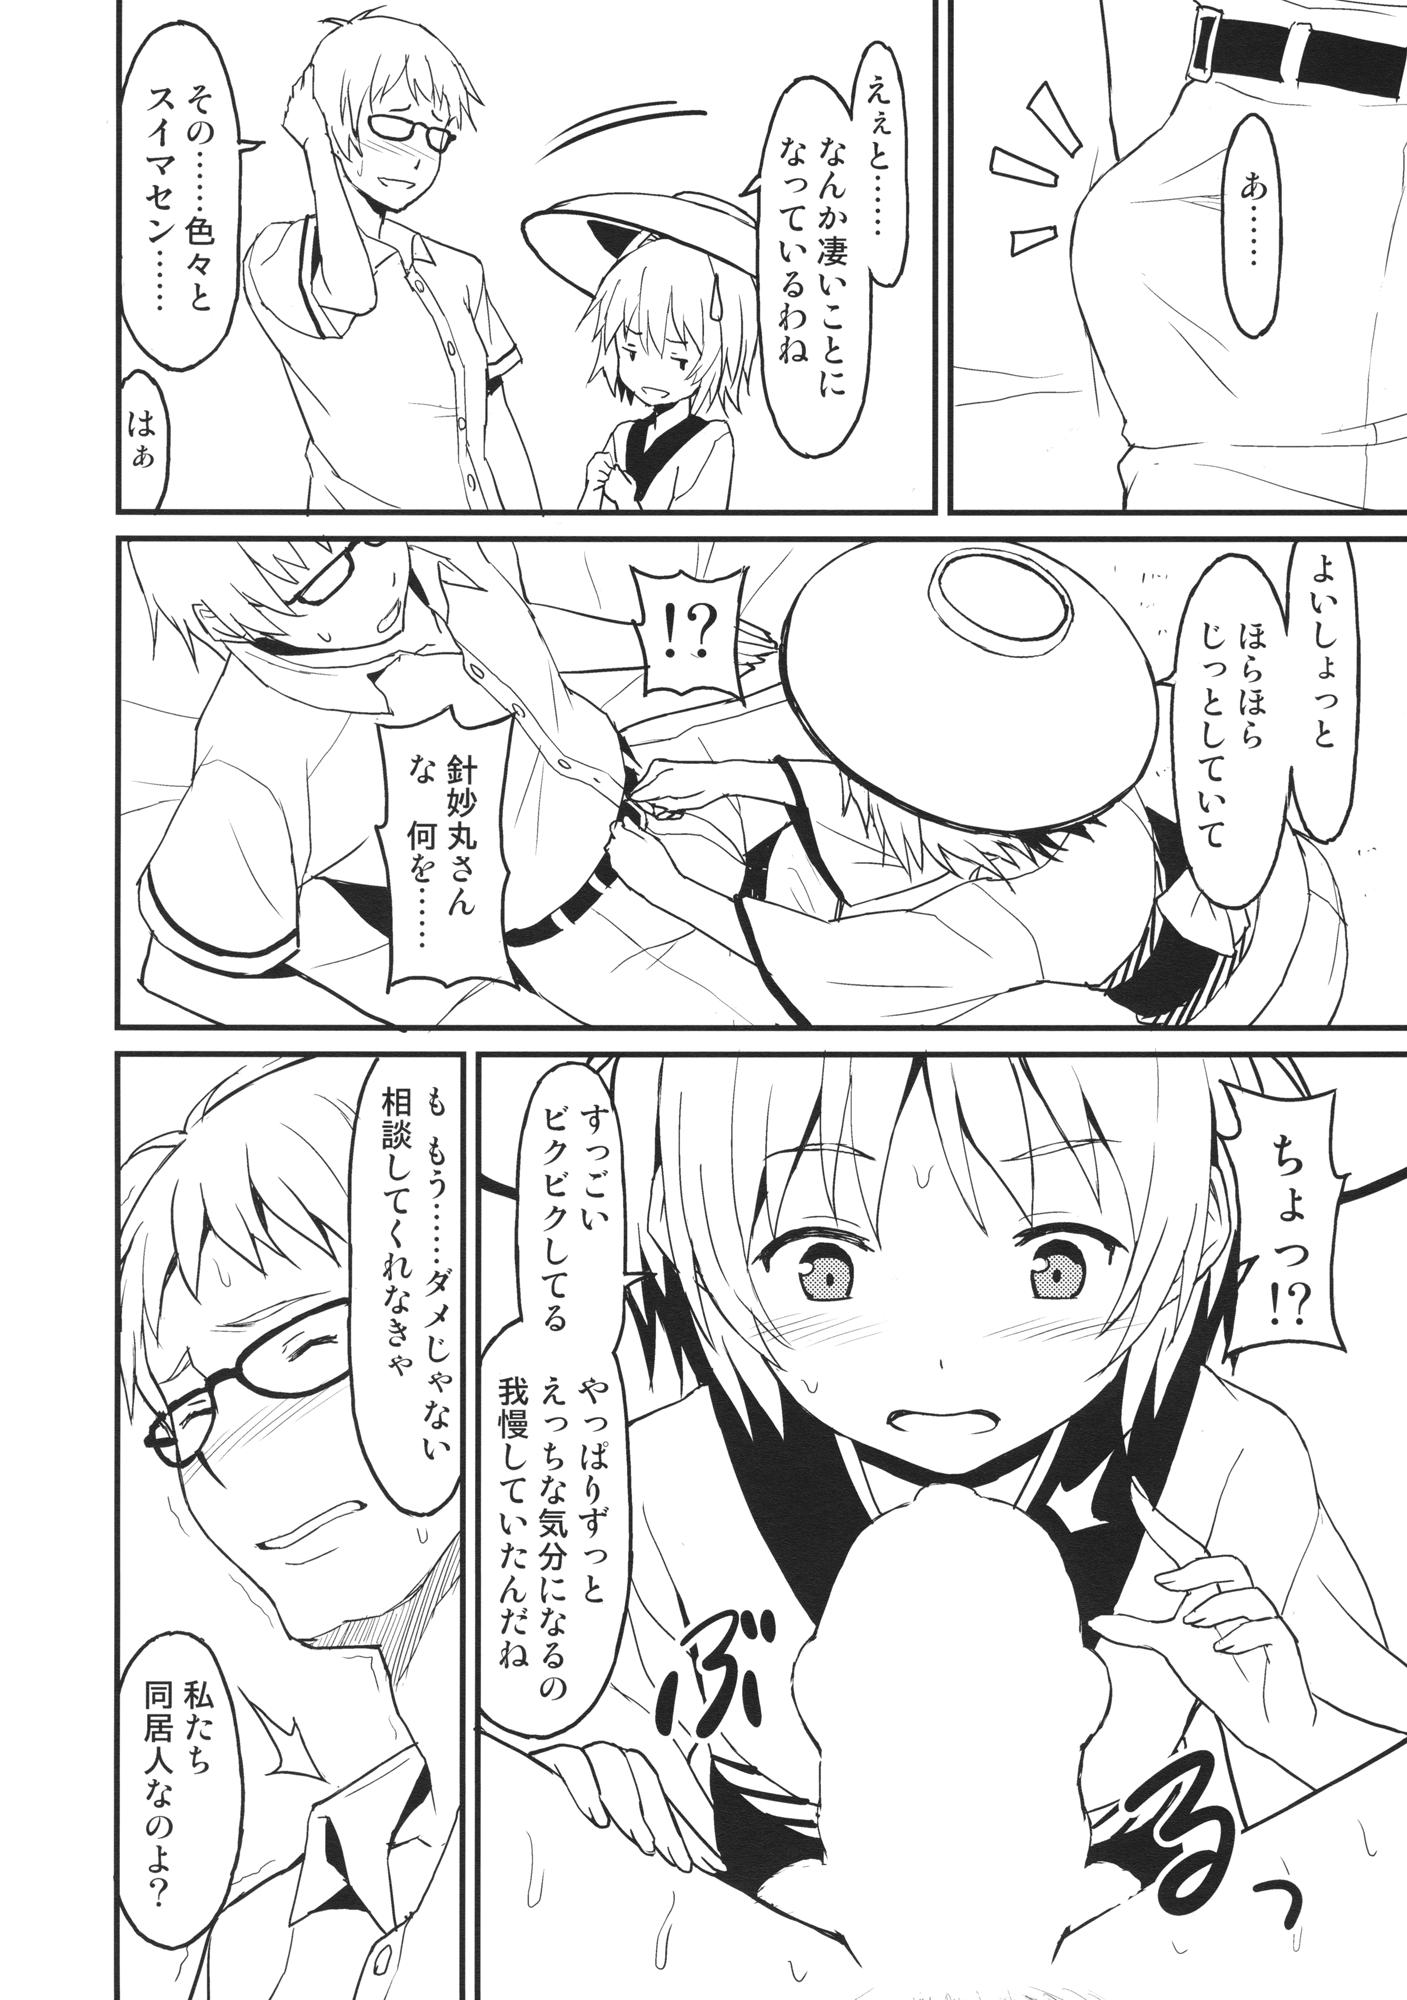 Neighbor Chiisana Seesaw Lovers - Touhou project Stripping - Page 7